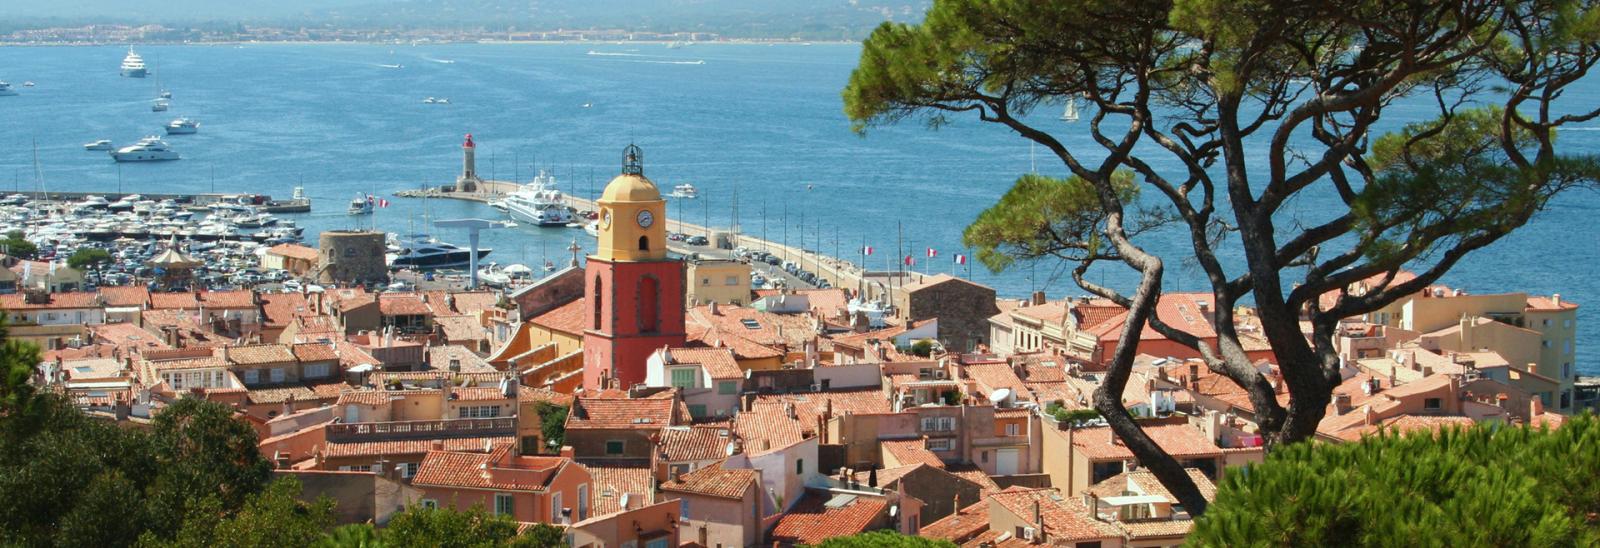 Fly from and to Saint-Tropez by private jet airplane rental or charter